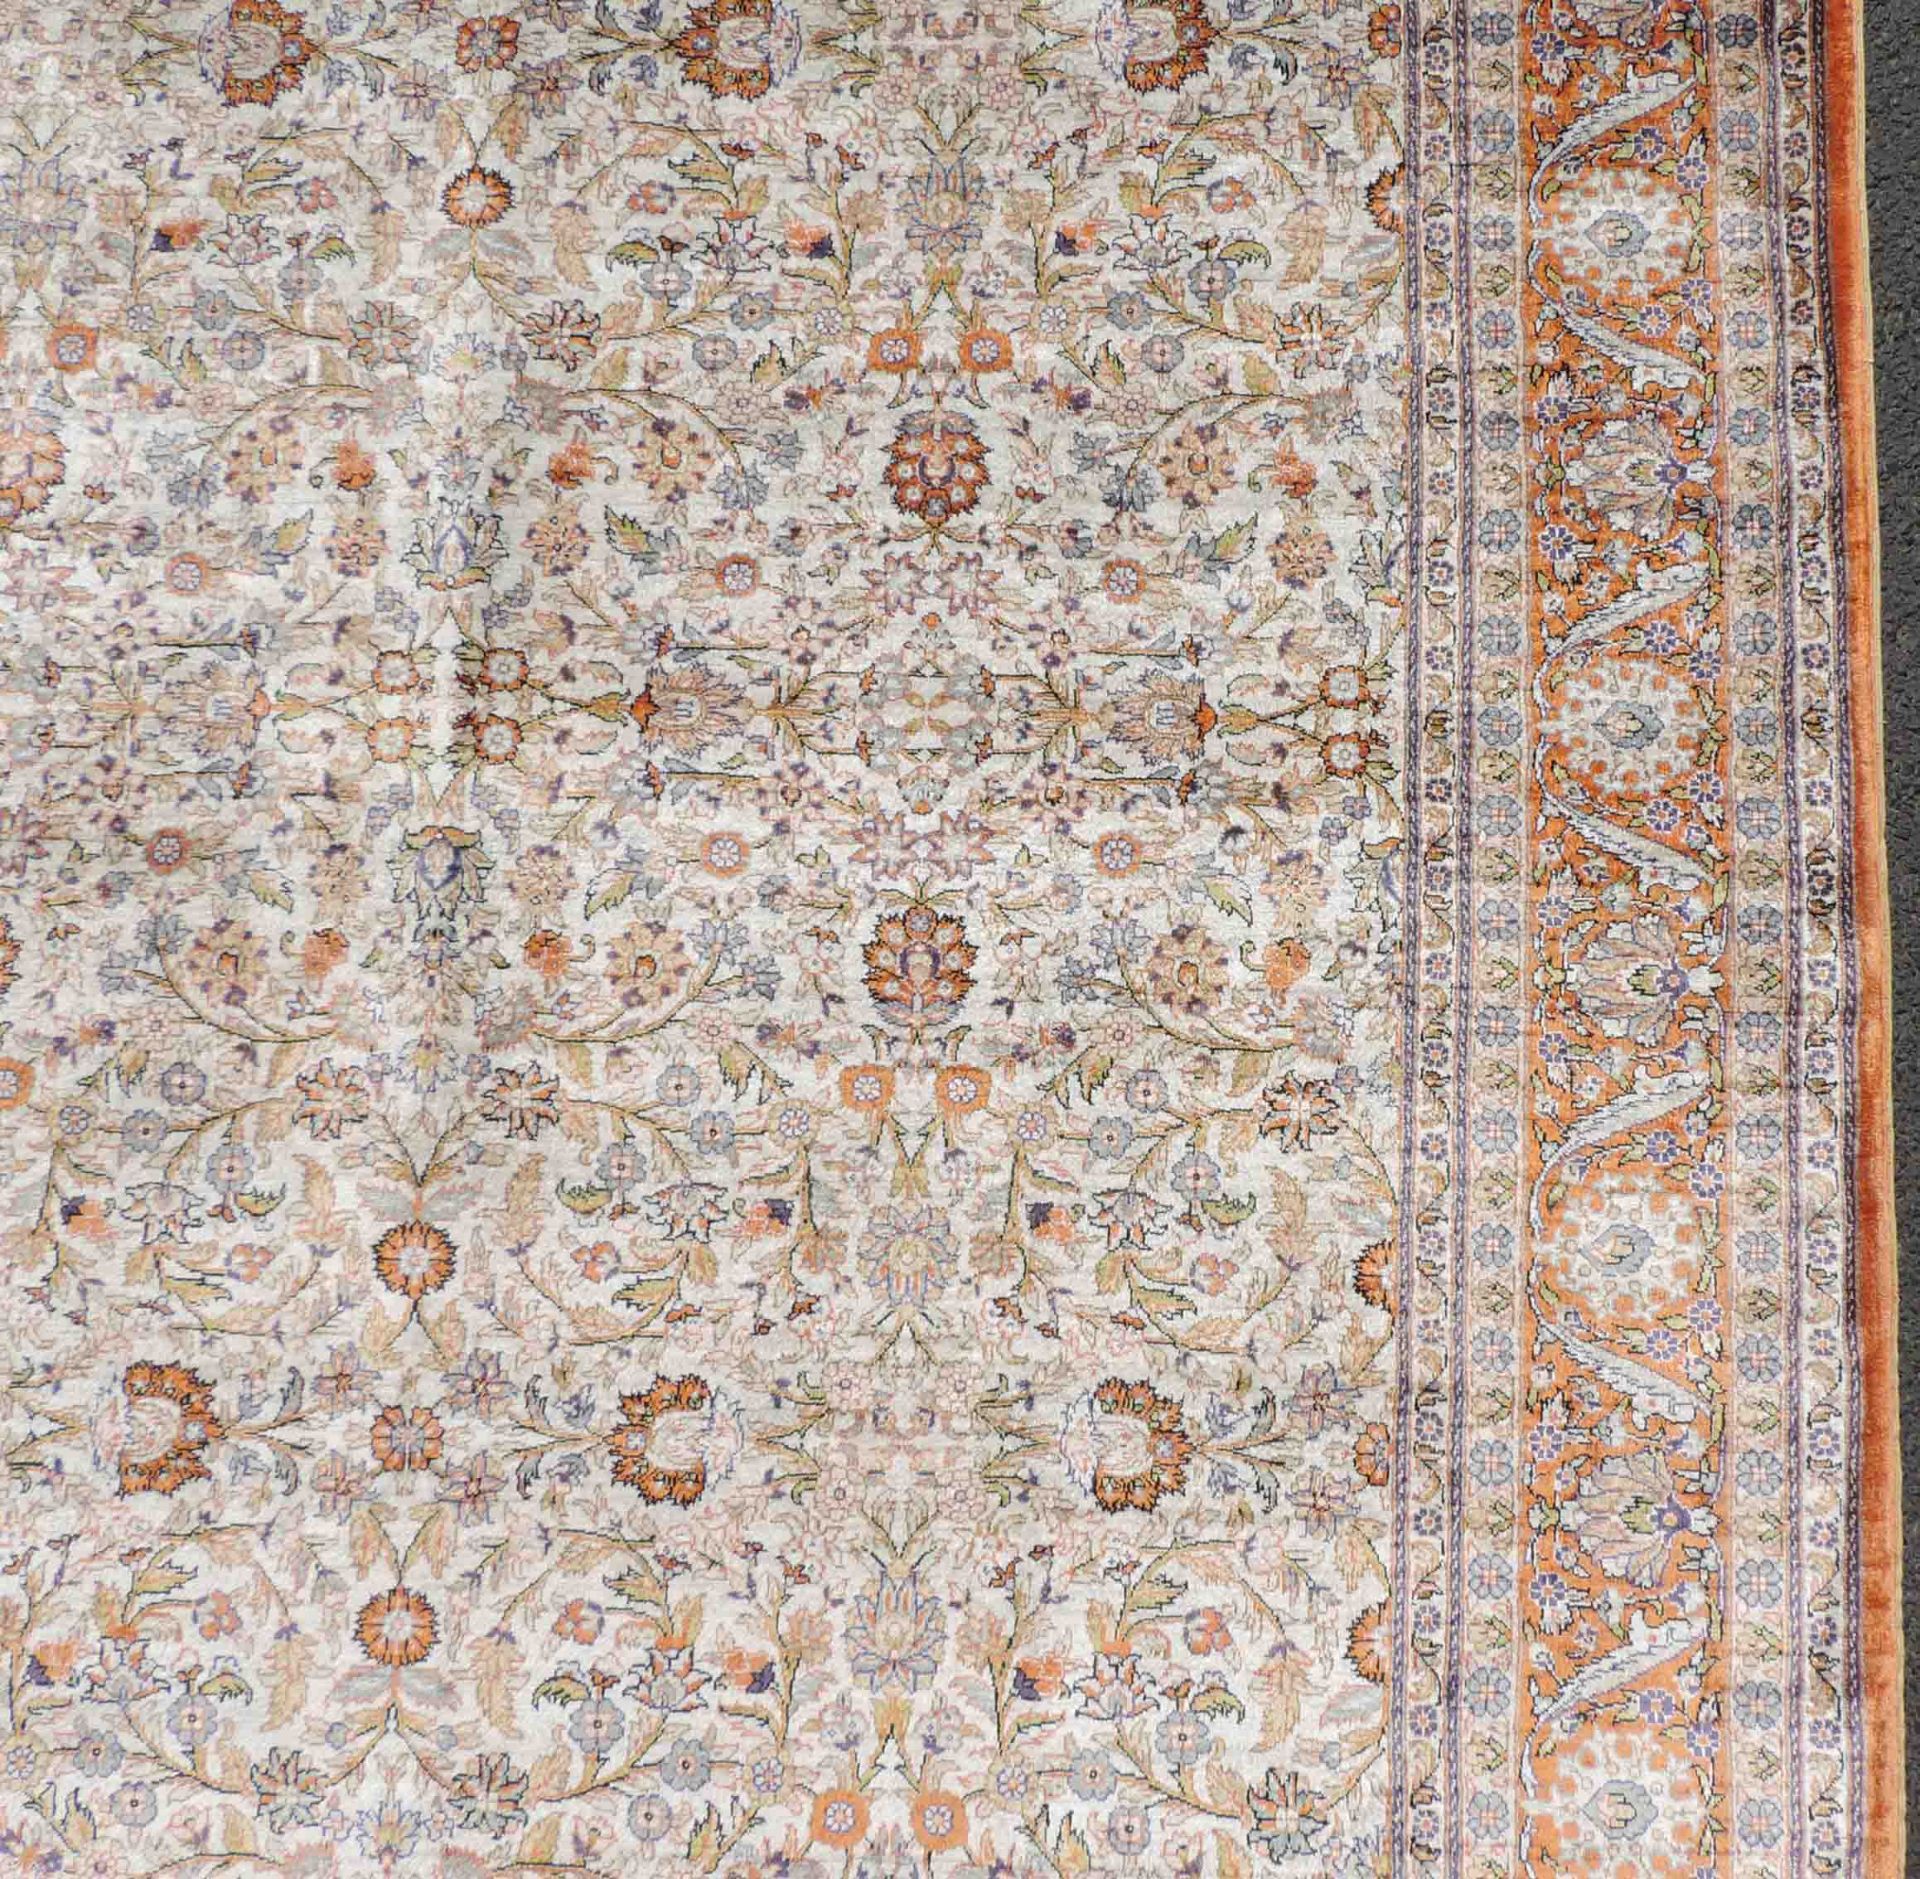 Hereke silk rug. Turkey. Signed. Extremely fine weave.180 cm x 128 cm. Knotted by hand. Silk on - Image 7 of 11